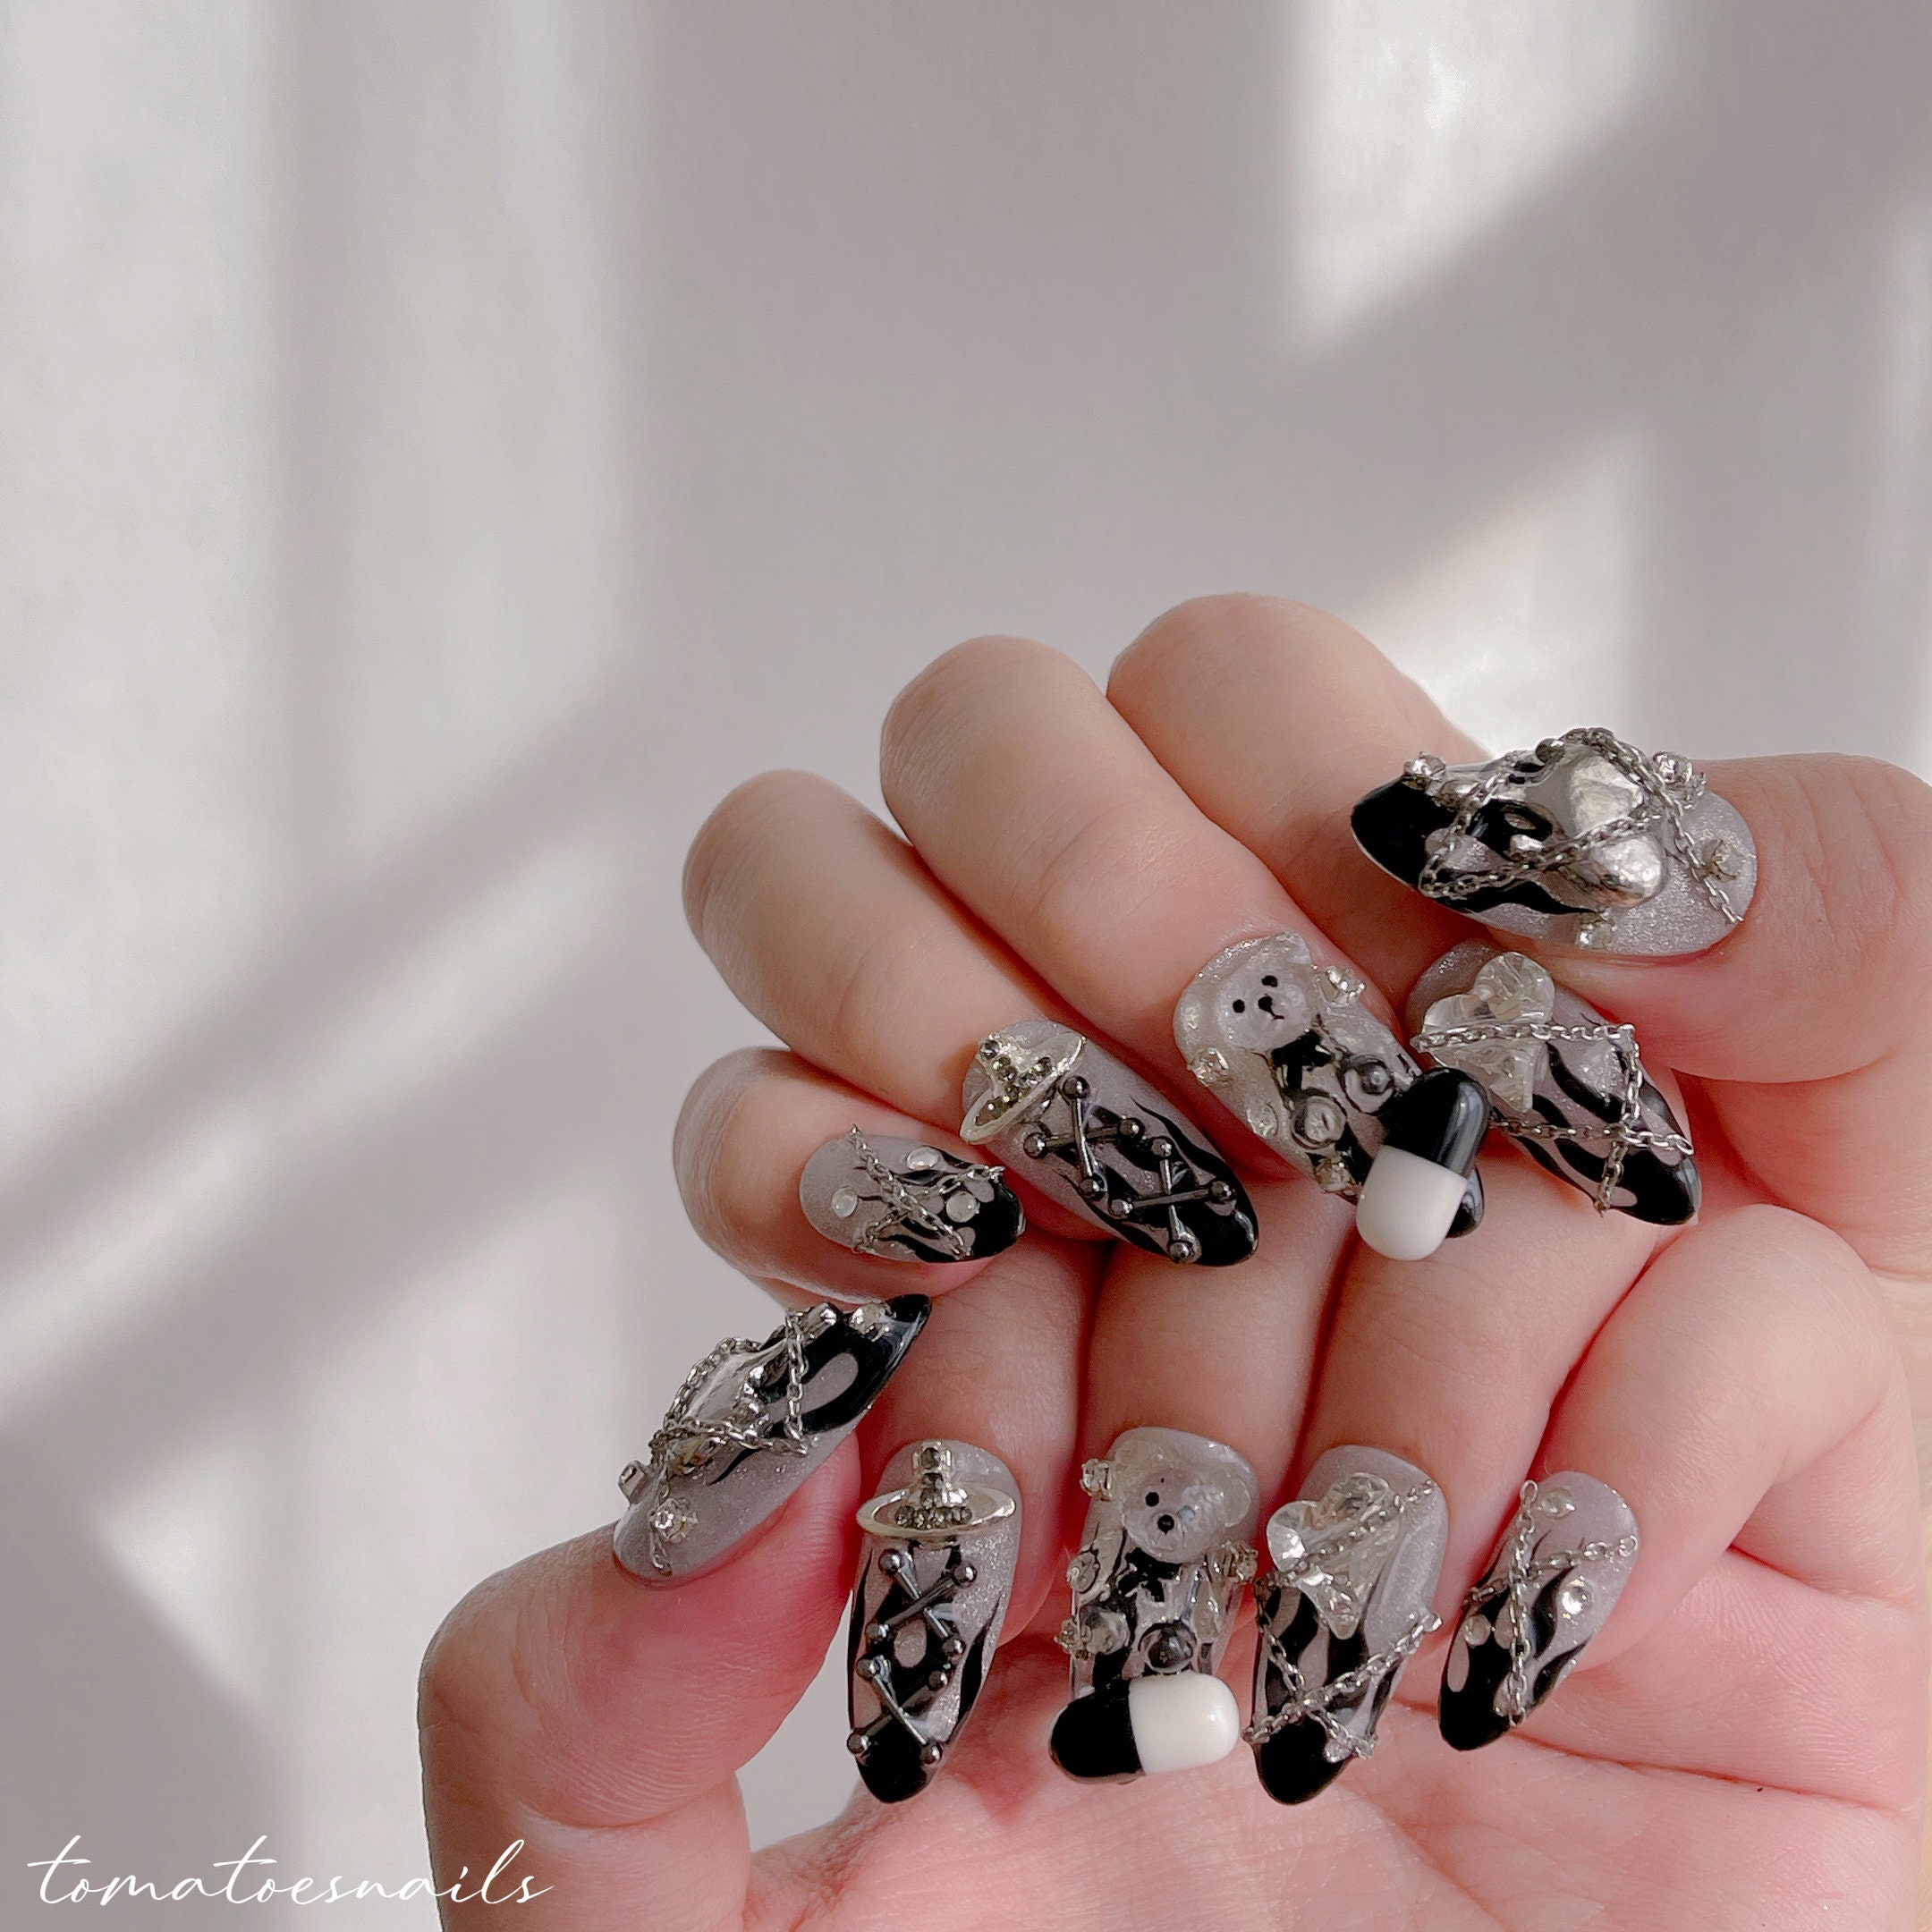 Mixed Metals Nails: Manicure Featuring Nail Foils and Studs  The Happy  Sloths: Beauty, Makeup, and Skincare Blog with Reviews and Swatches